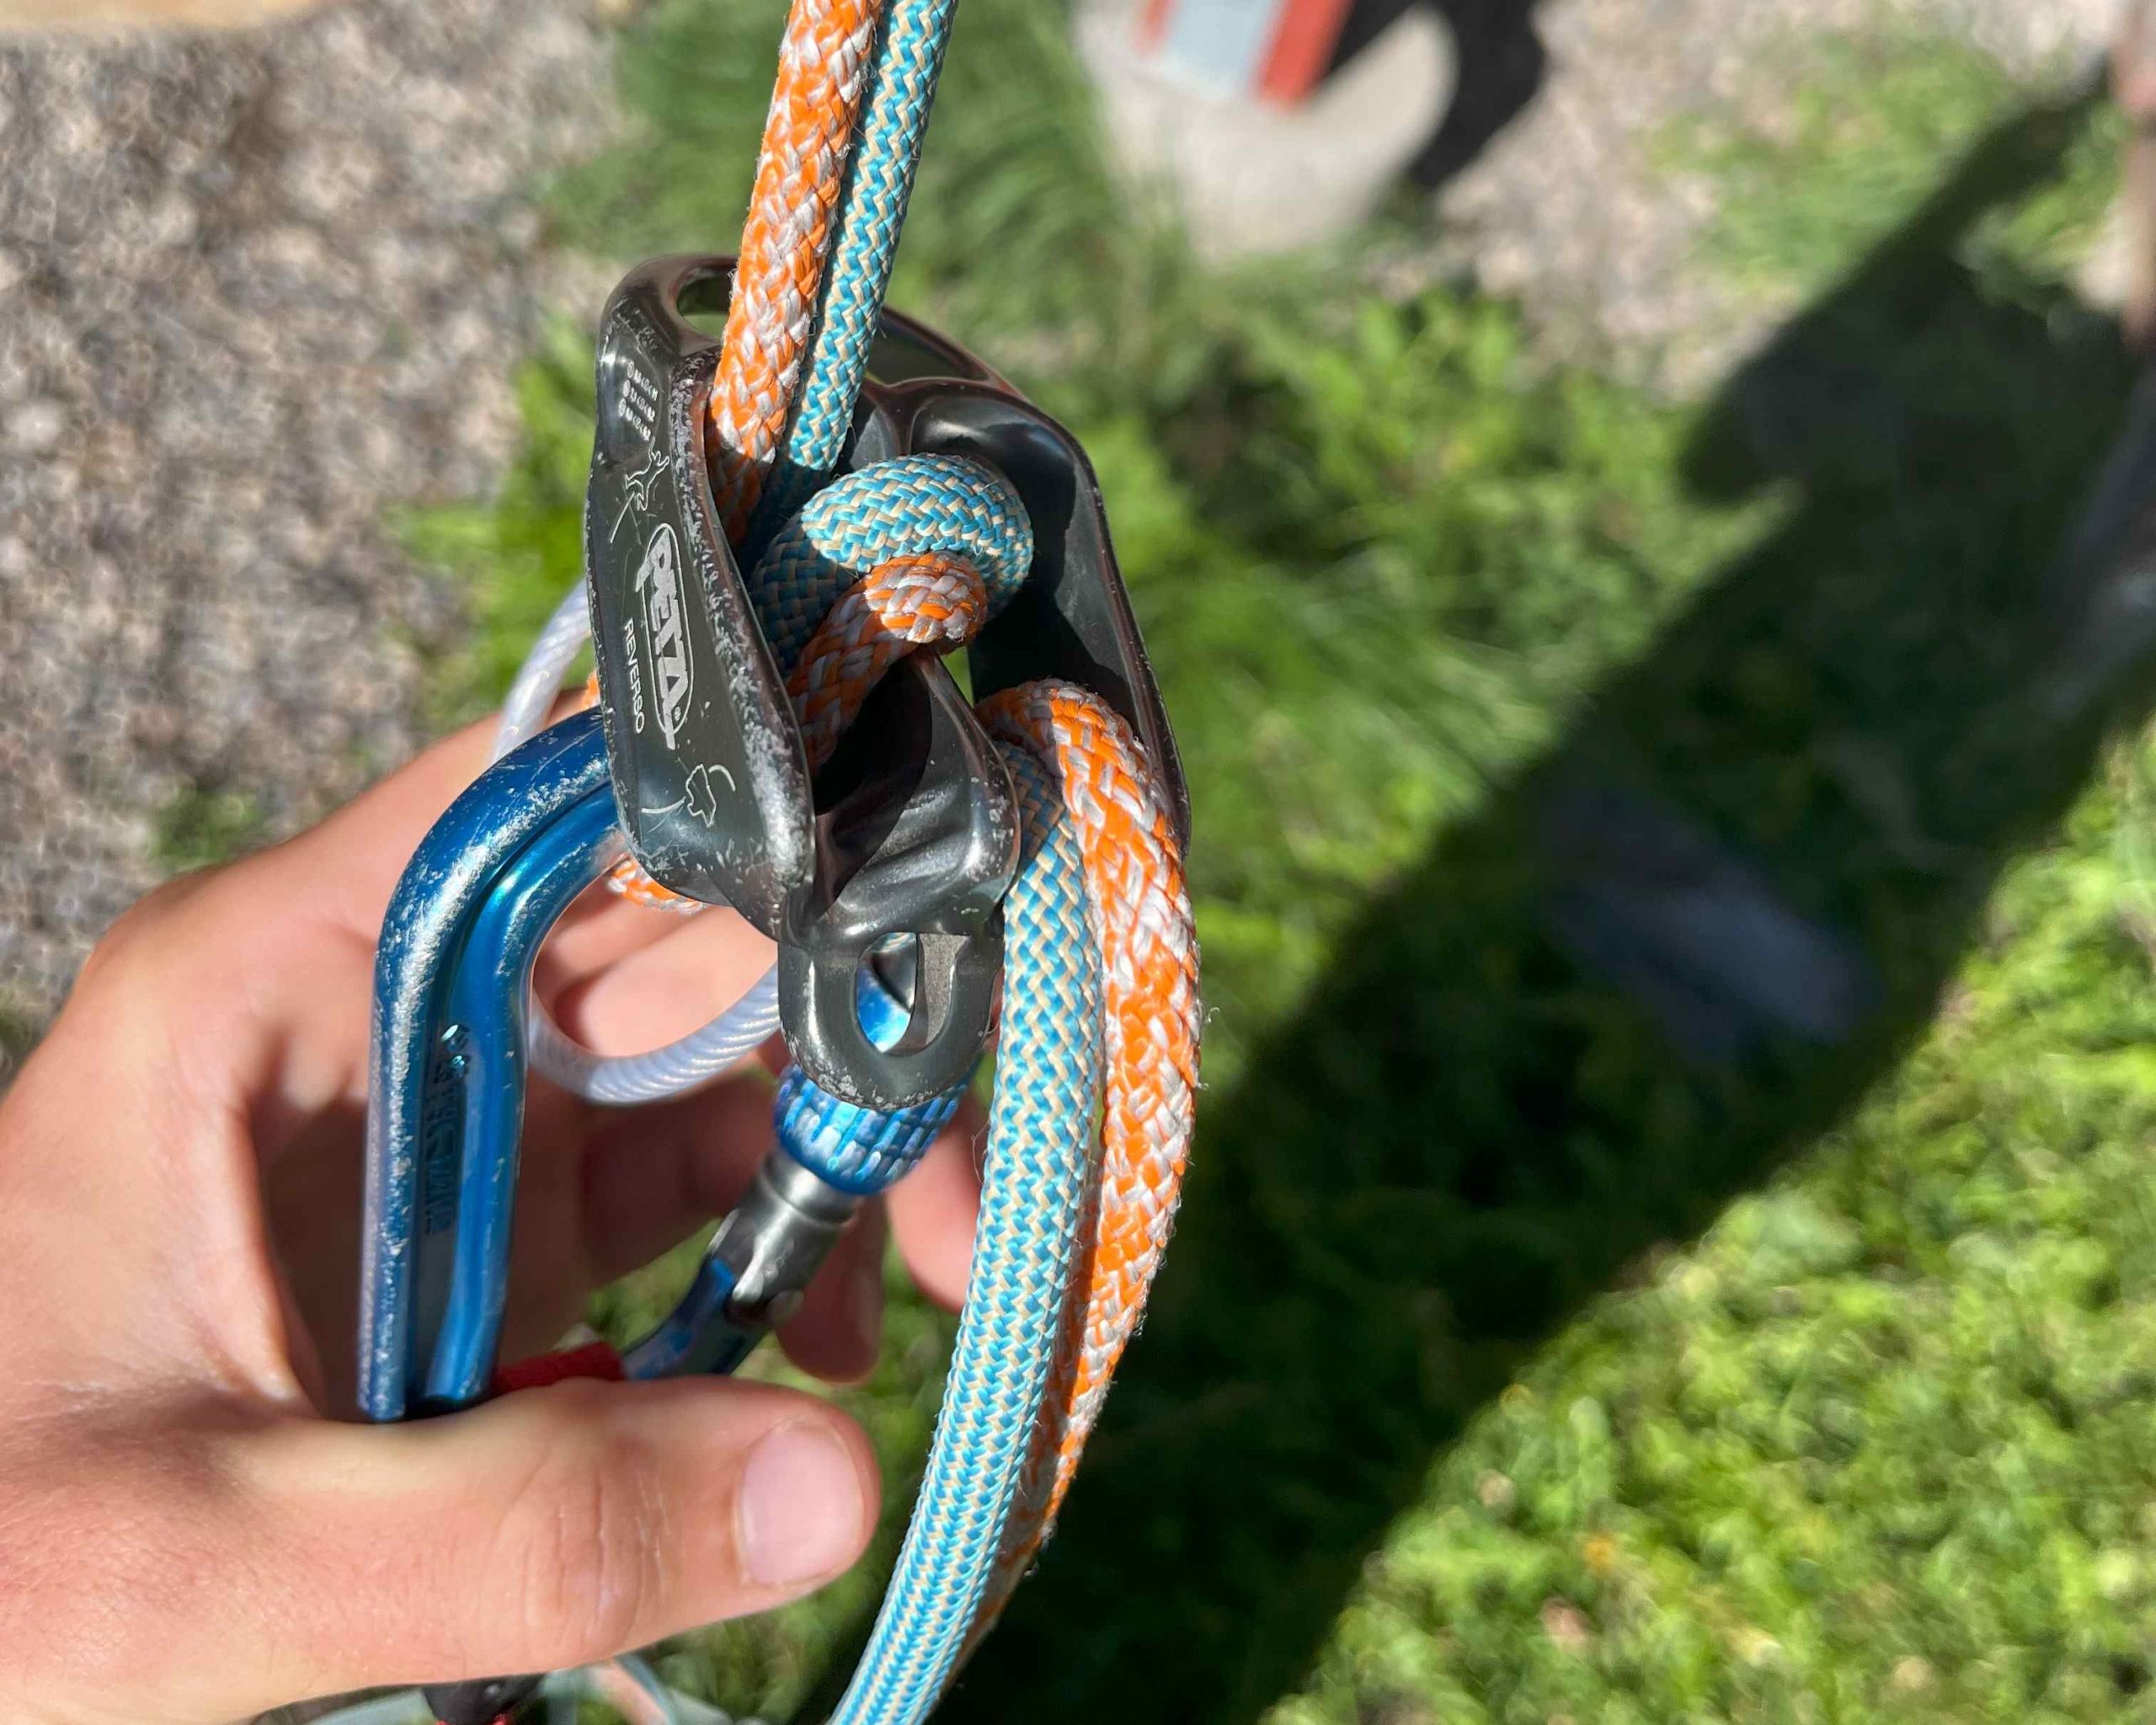 Rappelling on Skinny Ropes—Part 1: Devices - The High Route